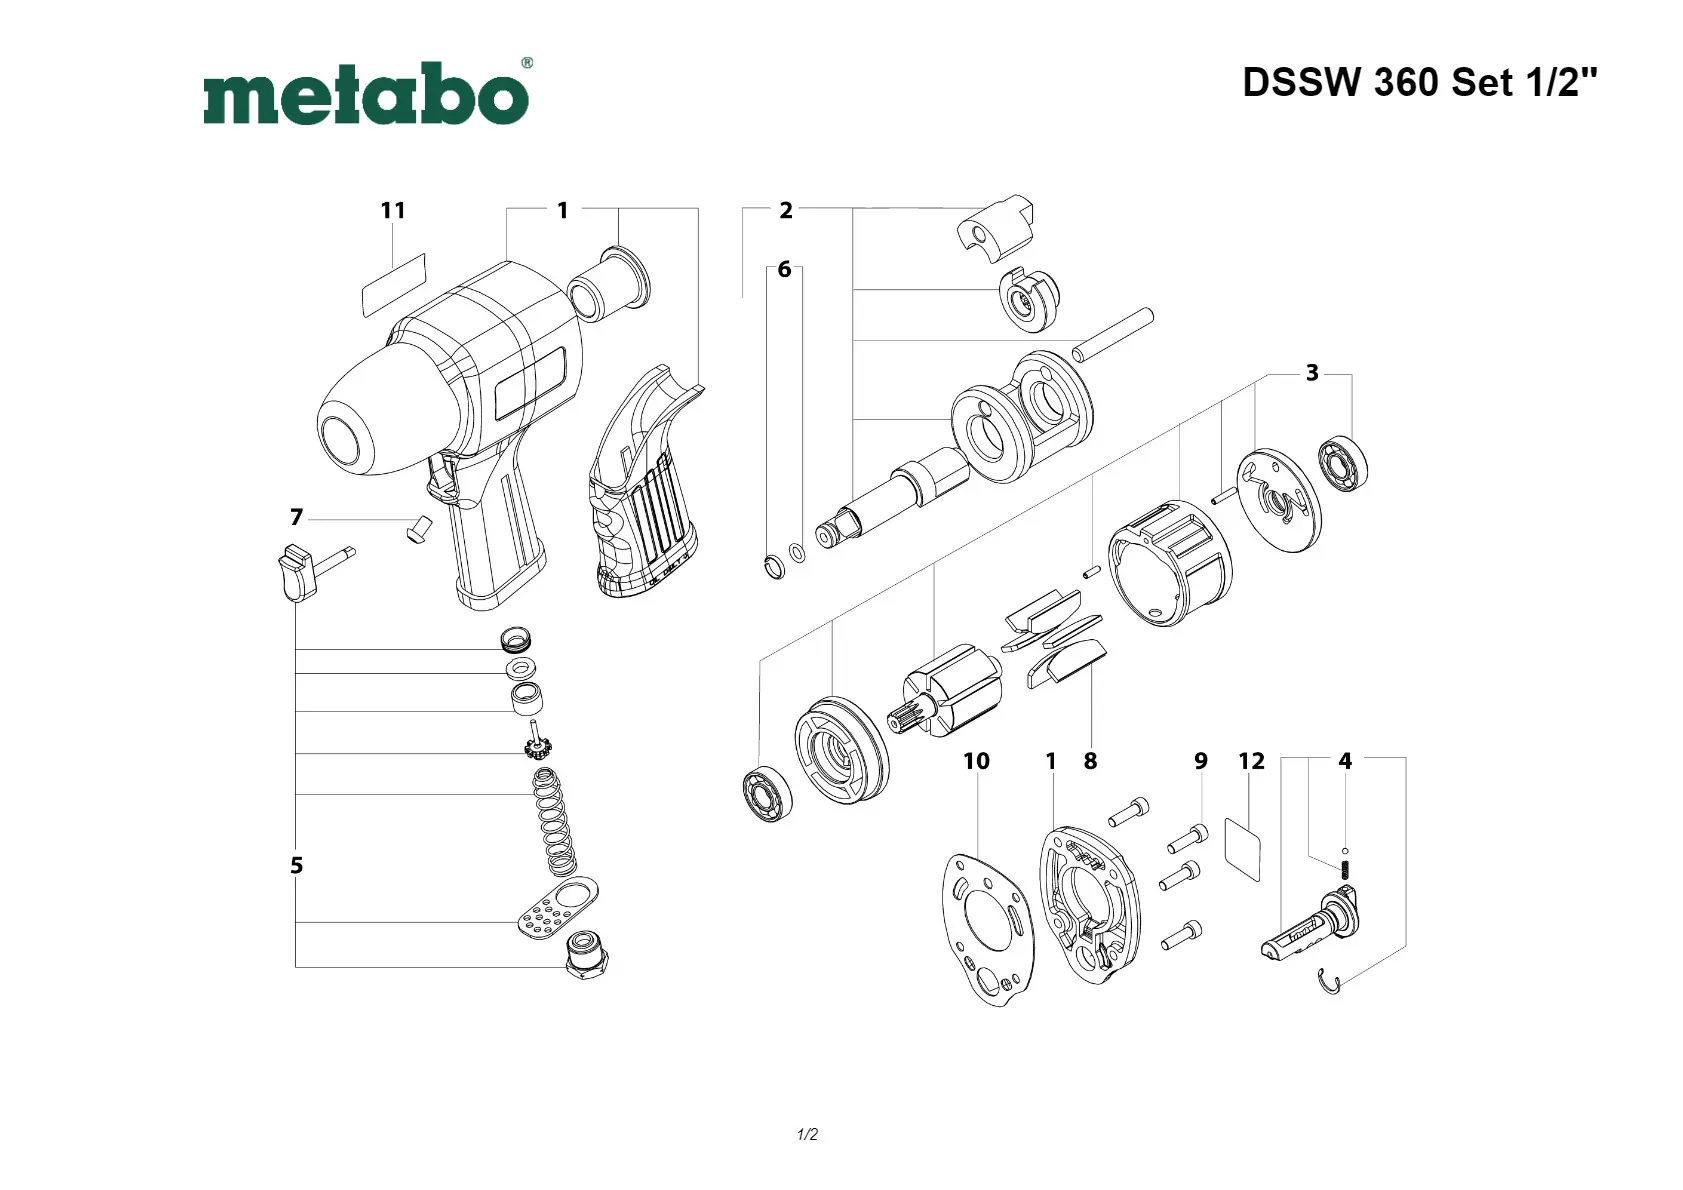 Metabo Change-over switch compl.